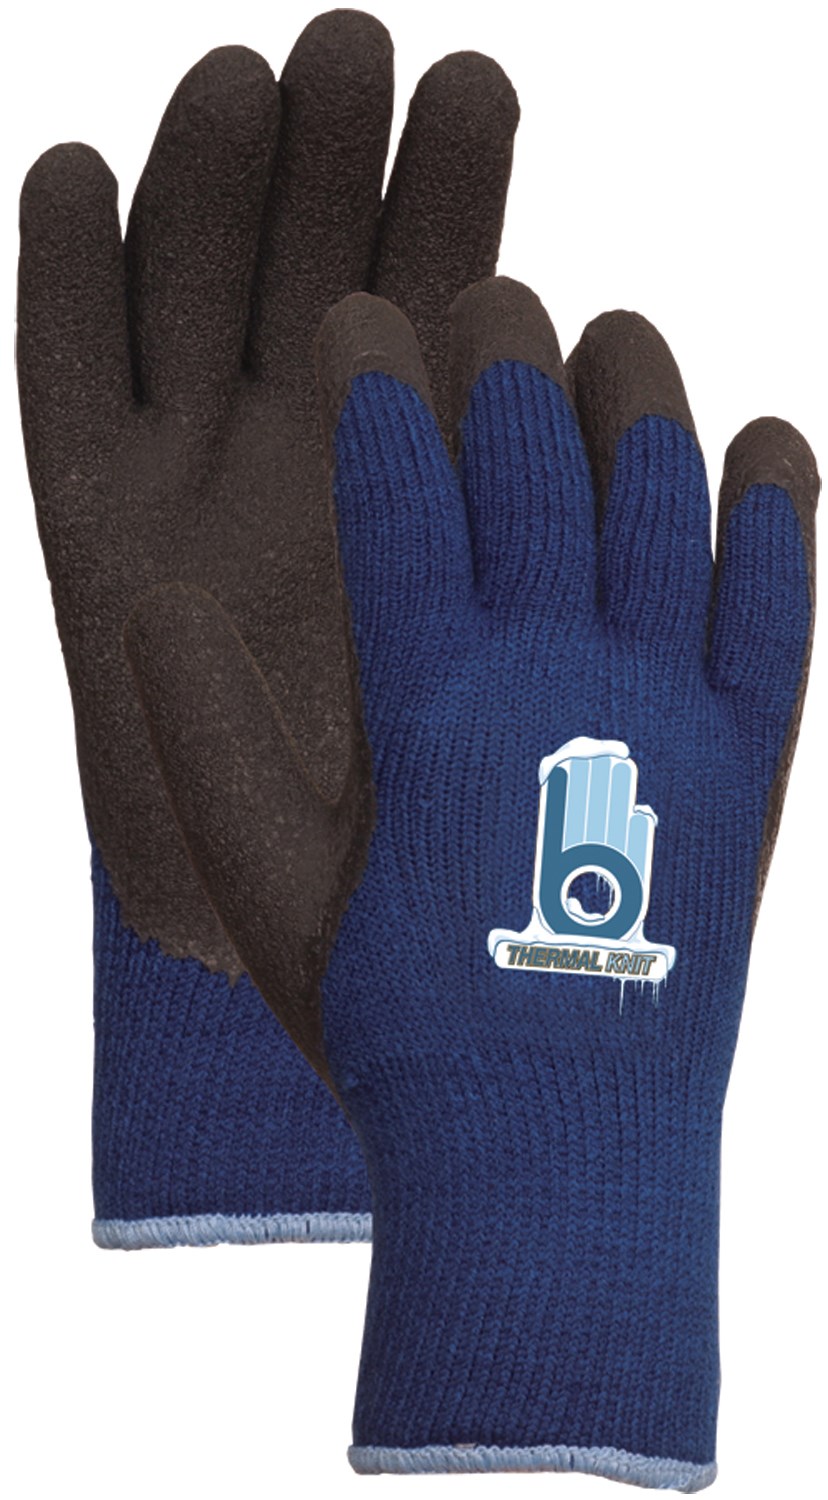 Bellingham Glove C4005s Small Blue Thermal Knit Gloves With Rubber Palm - image 1 of 2